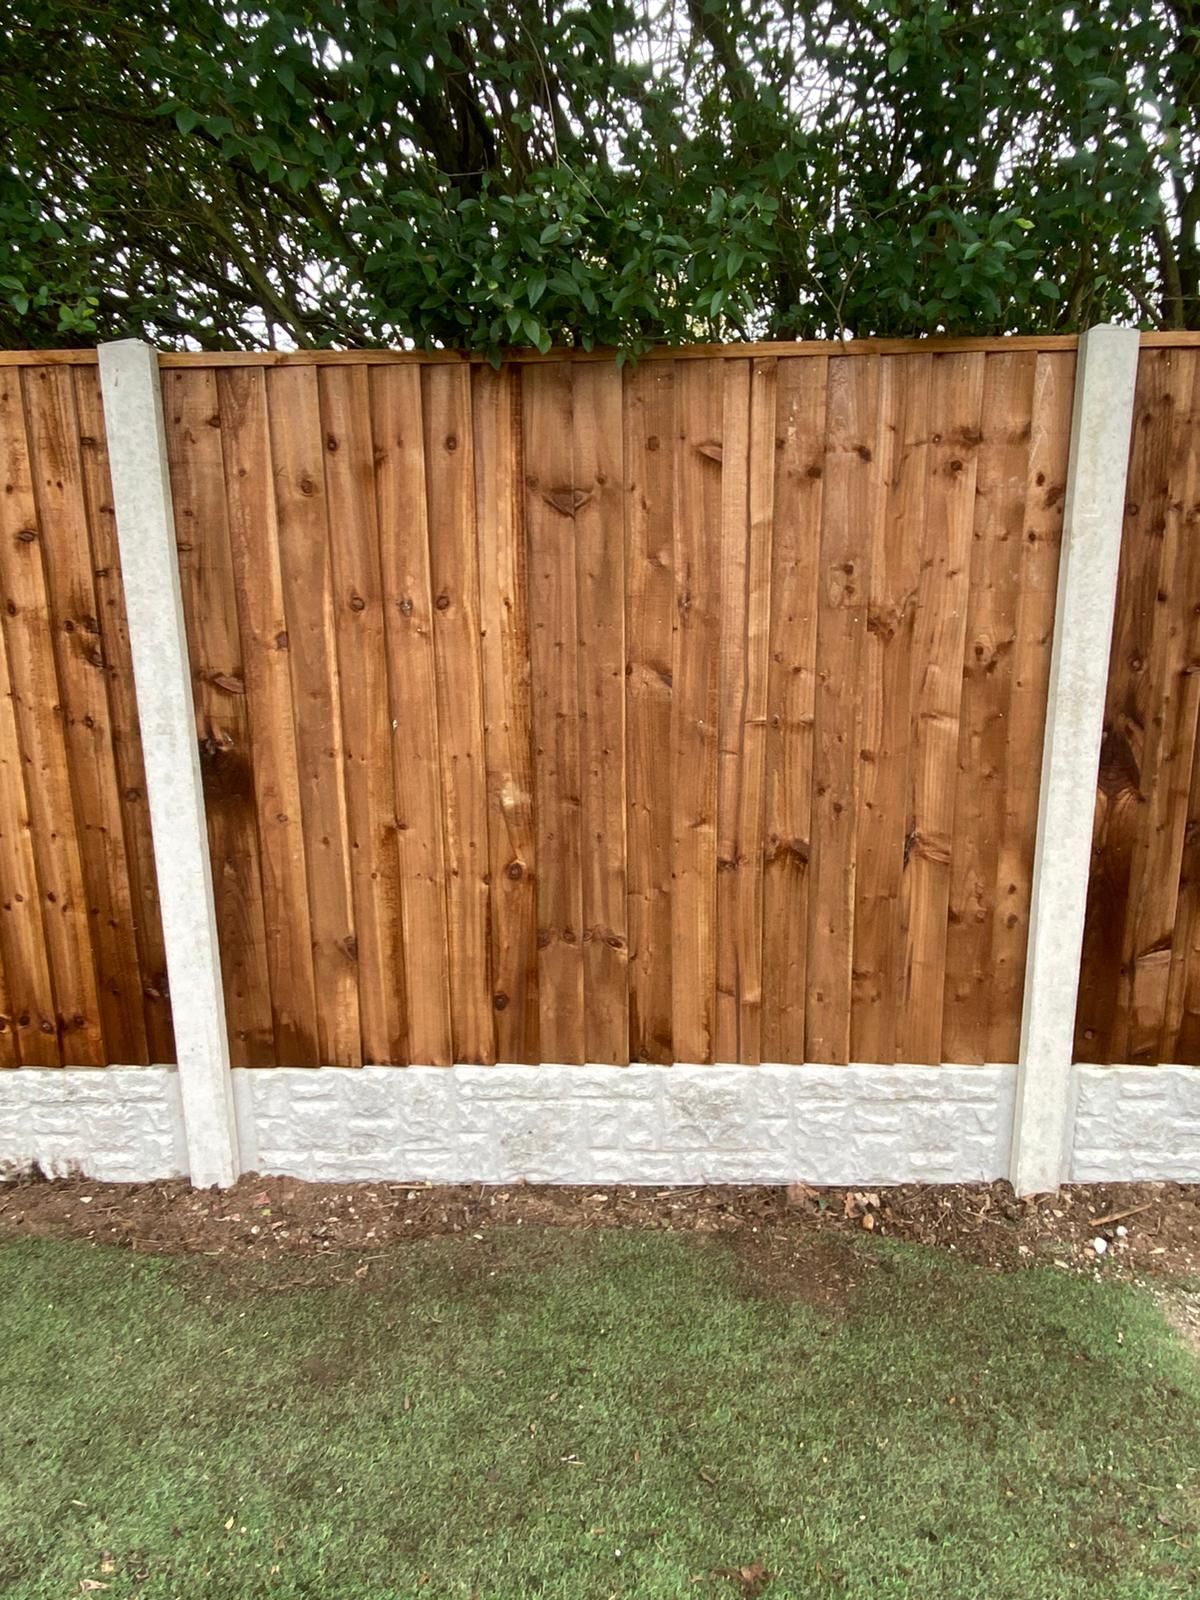 J&Z Fencing Barry wooden garden fence with concrete posts and rock faced gravel boards